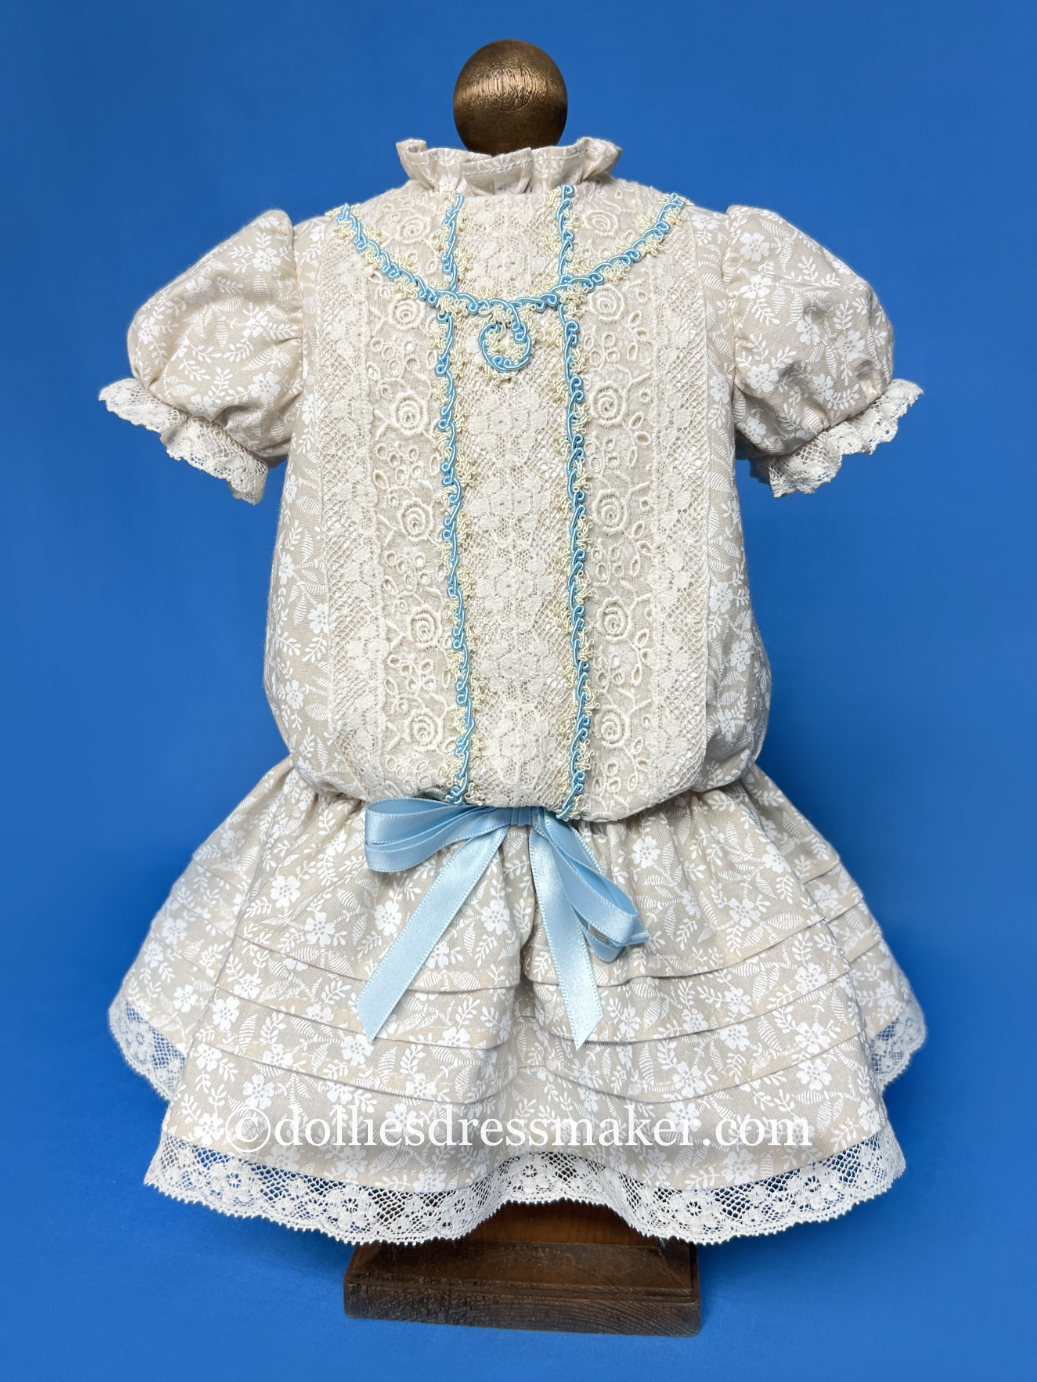 Dress with Tucks and Vintage Lace | American Girl Doll Samantha • Nellie